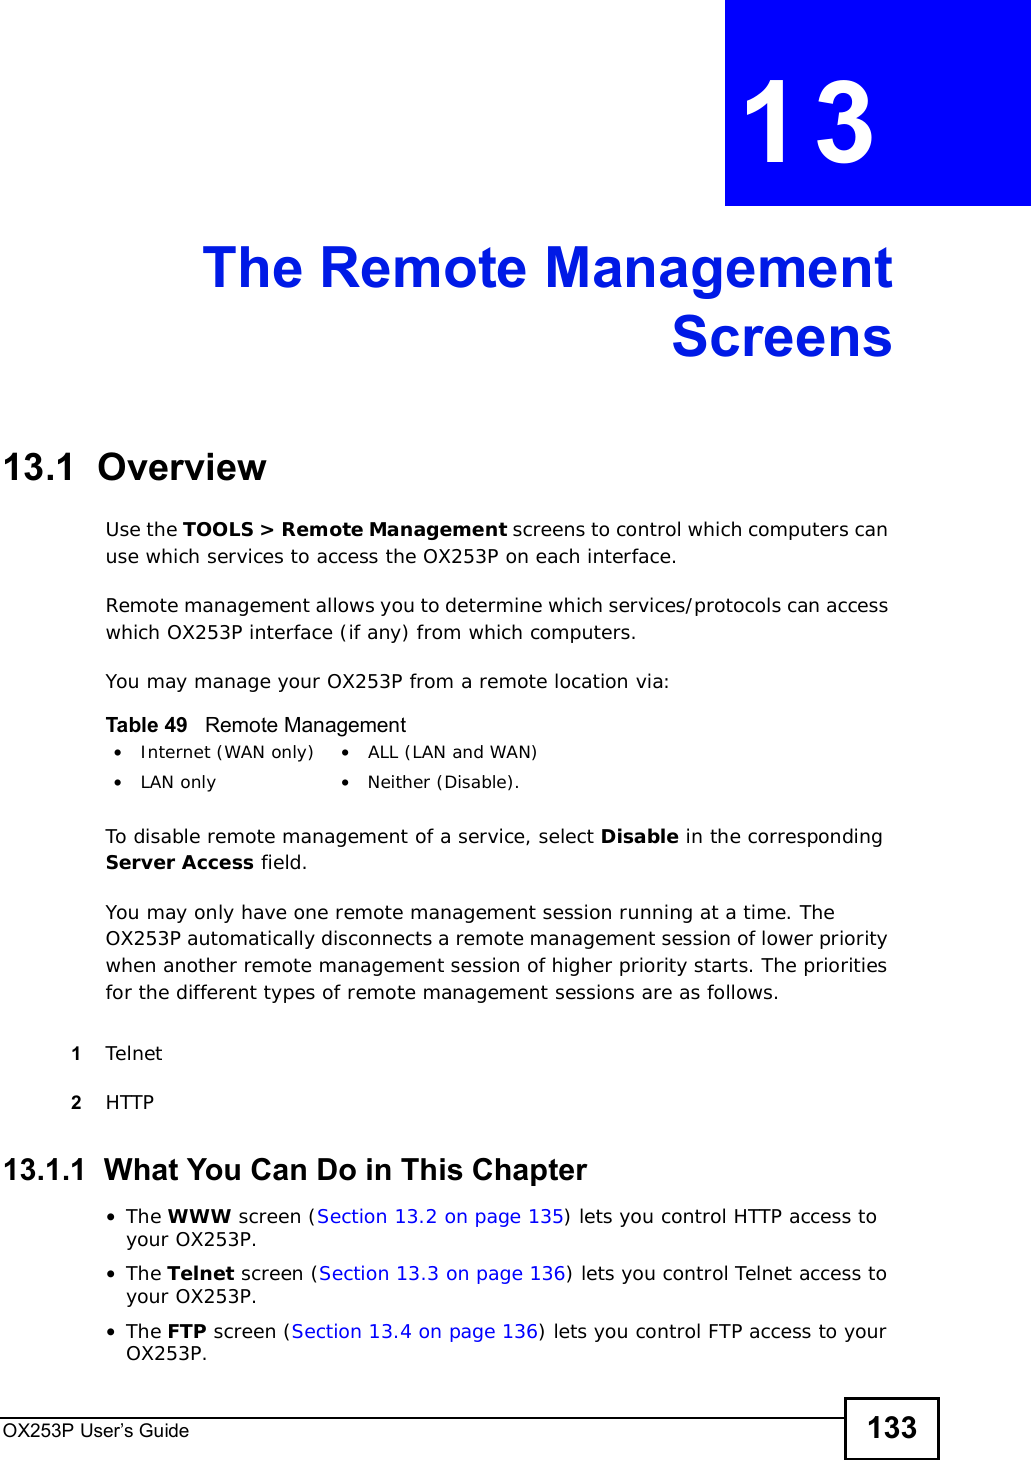 OX253P User’s Guide 133CHAPTER 13The Remote ManagementScreens13.1  OverviewUse the TOOLS &gt; Remote Management screens to control which computers can use which services to access the OX253P on each interface.Remote management allows you to determine which services/protocols can access which OX253P interface (if any) from which computers.You may manage your OX253P from a remote location via:To disable remote management of a service, select Disable in the corresponding Server Access field.You may only have one remote management session running at a time. The OX253P automatically disconnects a remote management session of lower priority when another remote management session of higher priority starts. The priorities for the different types of remote management sessions are as follows.1Telnet2HTTP13.1.1  What You Can Do in This Chapter•The WWW screen (Section 13.2 on page 135) lets you control HTTP access to your OX253P.•The Telnet screen (Section 13.3 on page 136) lets you control Telnet access to your OX253P.•The FTP screen (Section 13.4 on page 136) lets you control FTP access to your OX253P.Table 49   Remote Management•Internet (WAN only) •ALL (LAN and WAN)•LAN only •Neither (Disable).